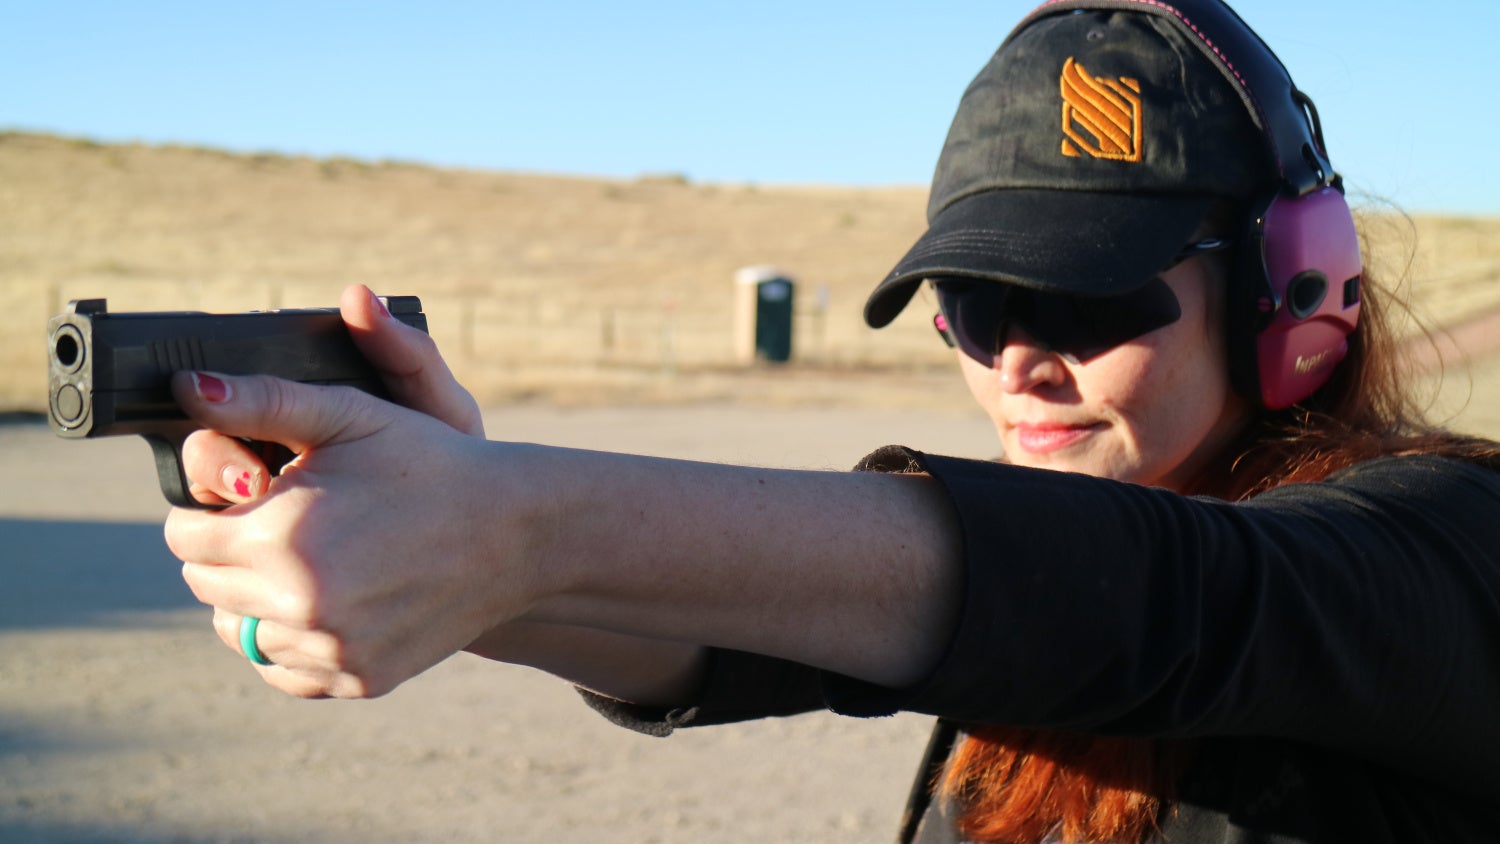 Women Now Make Up the Largest Group of New Gun Owners